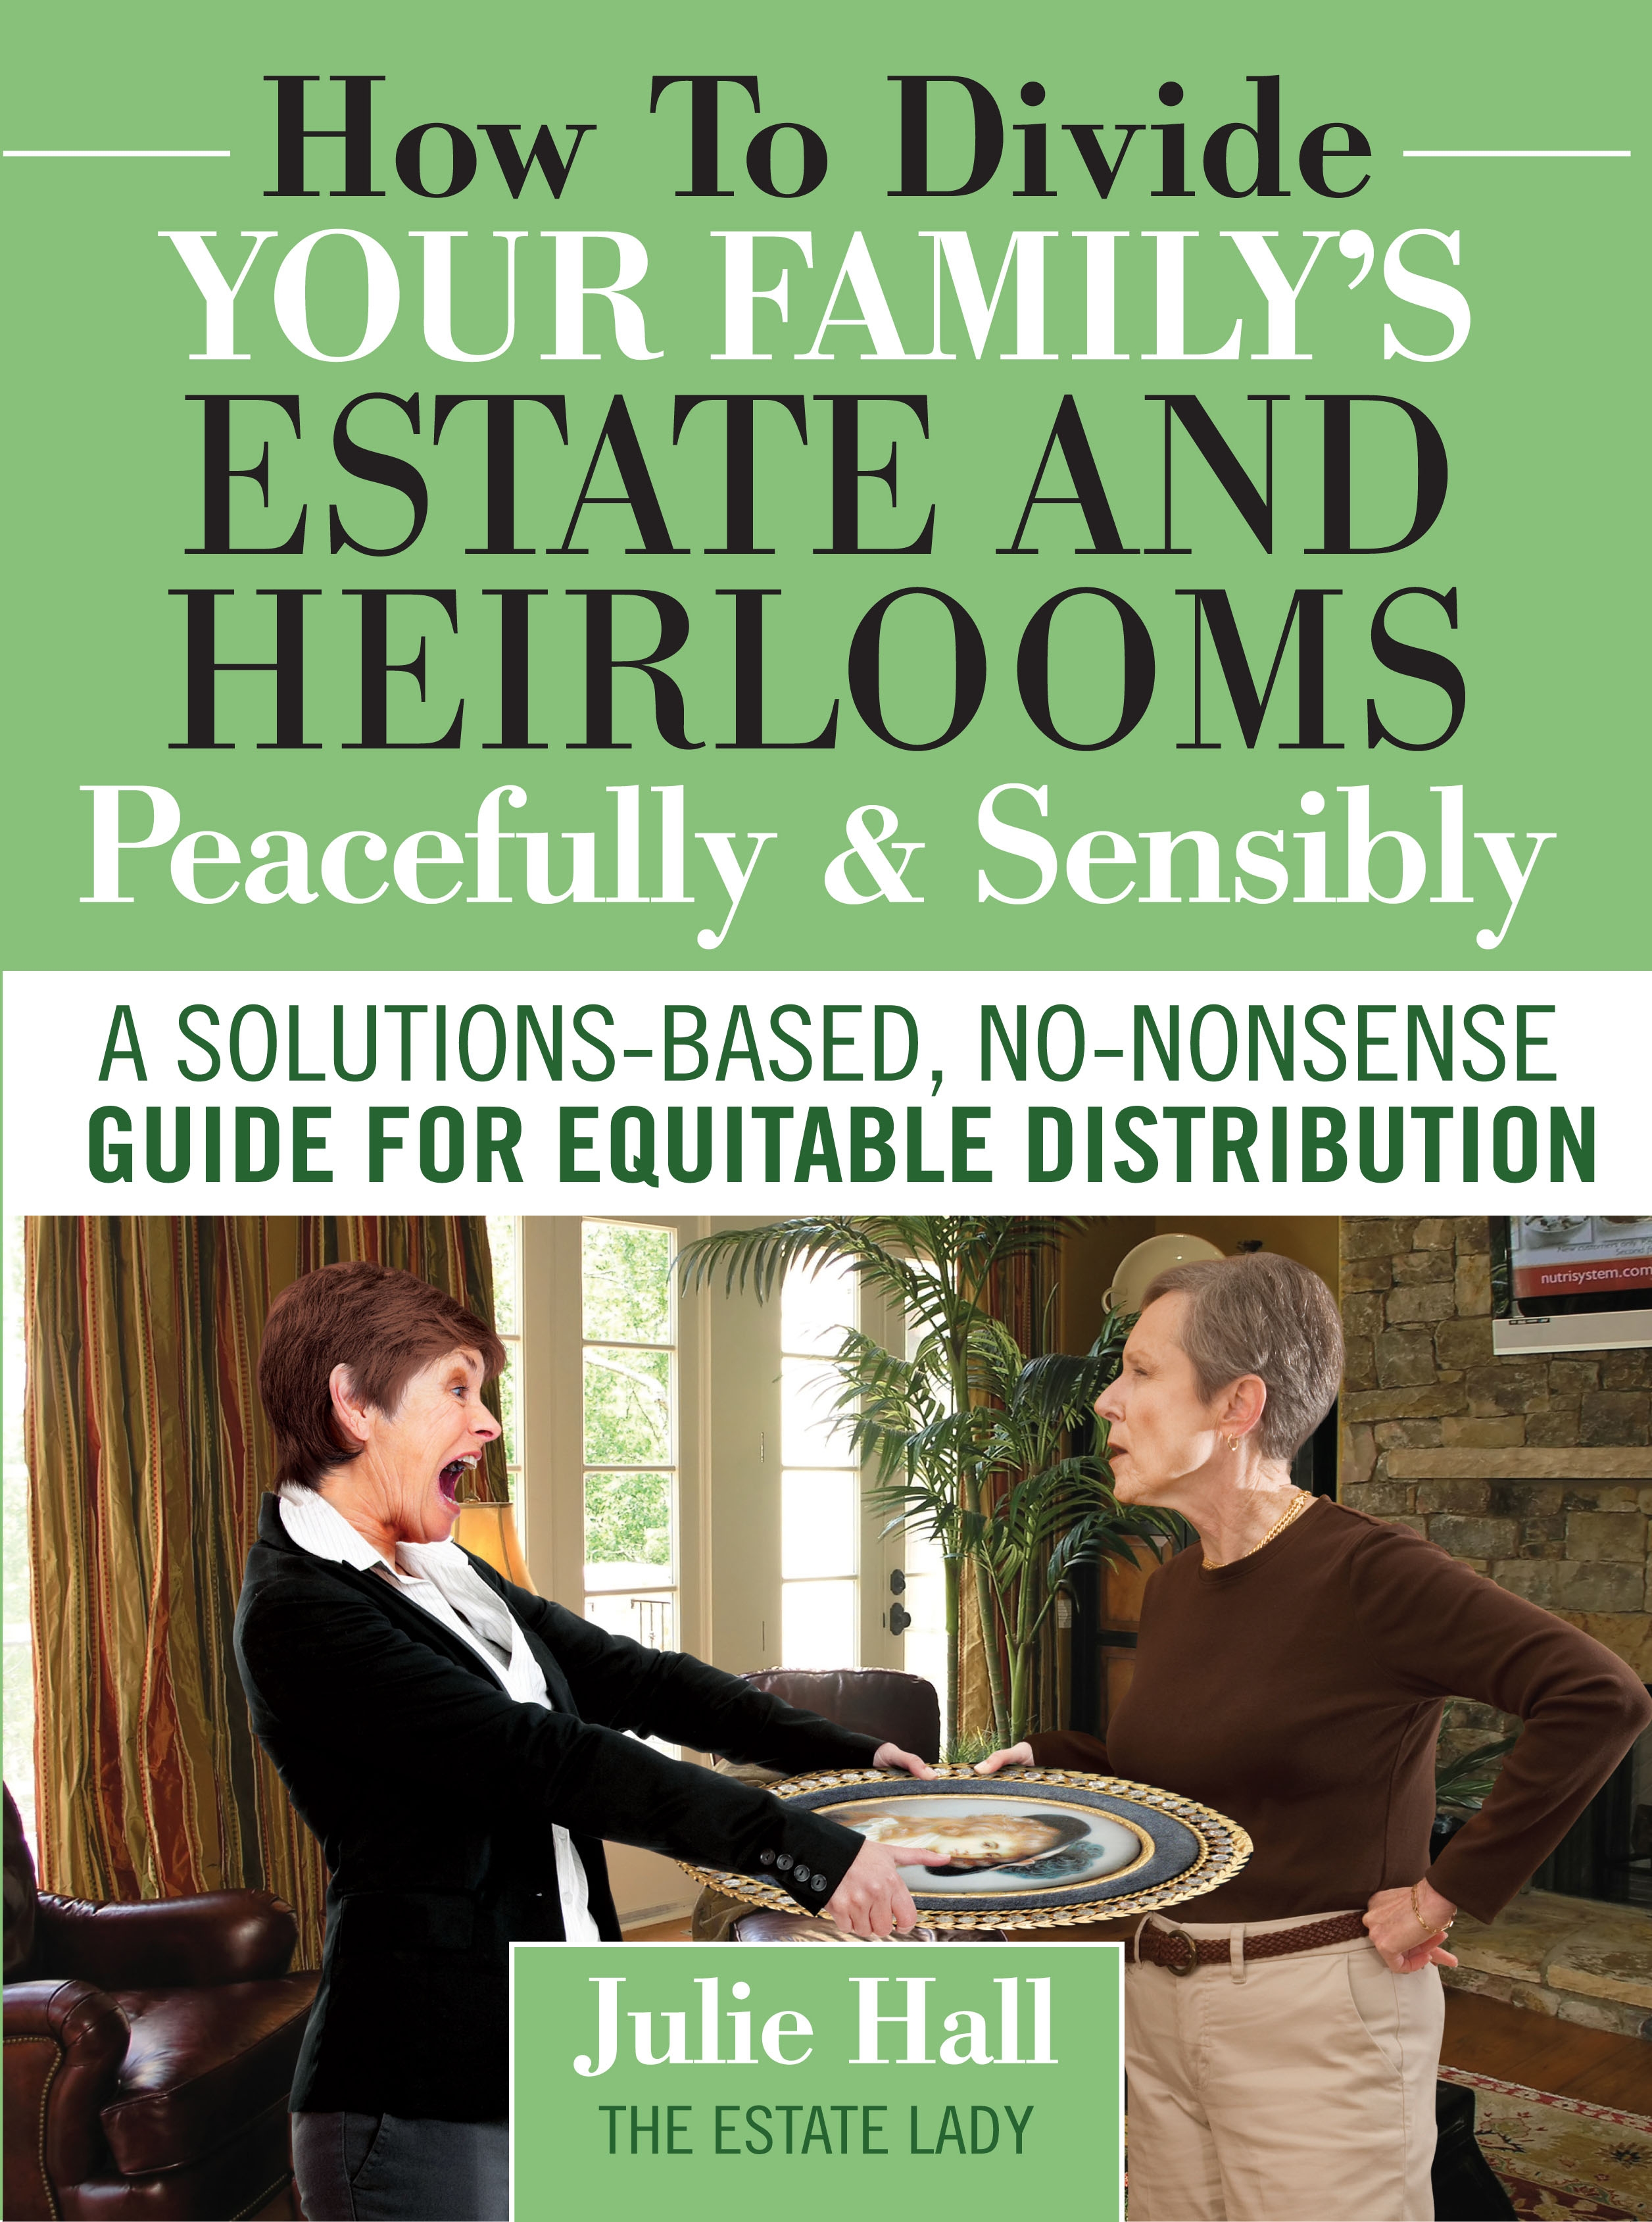 How to Divide Your Family's Estate and Heirlooms Peacefully and Sensibly